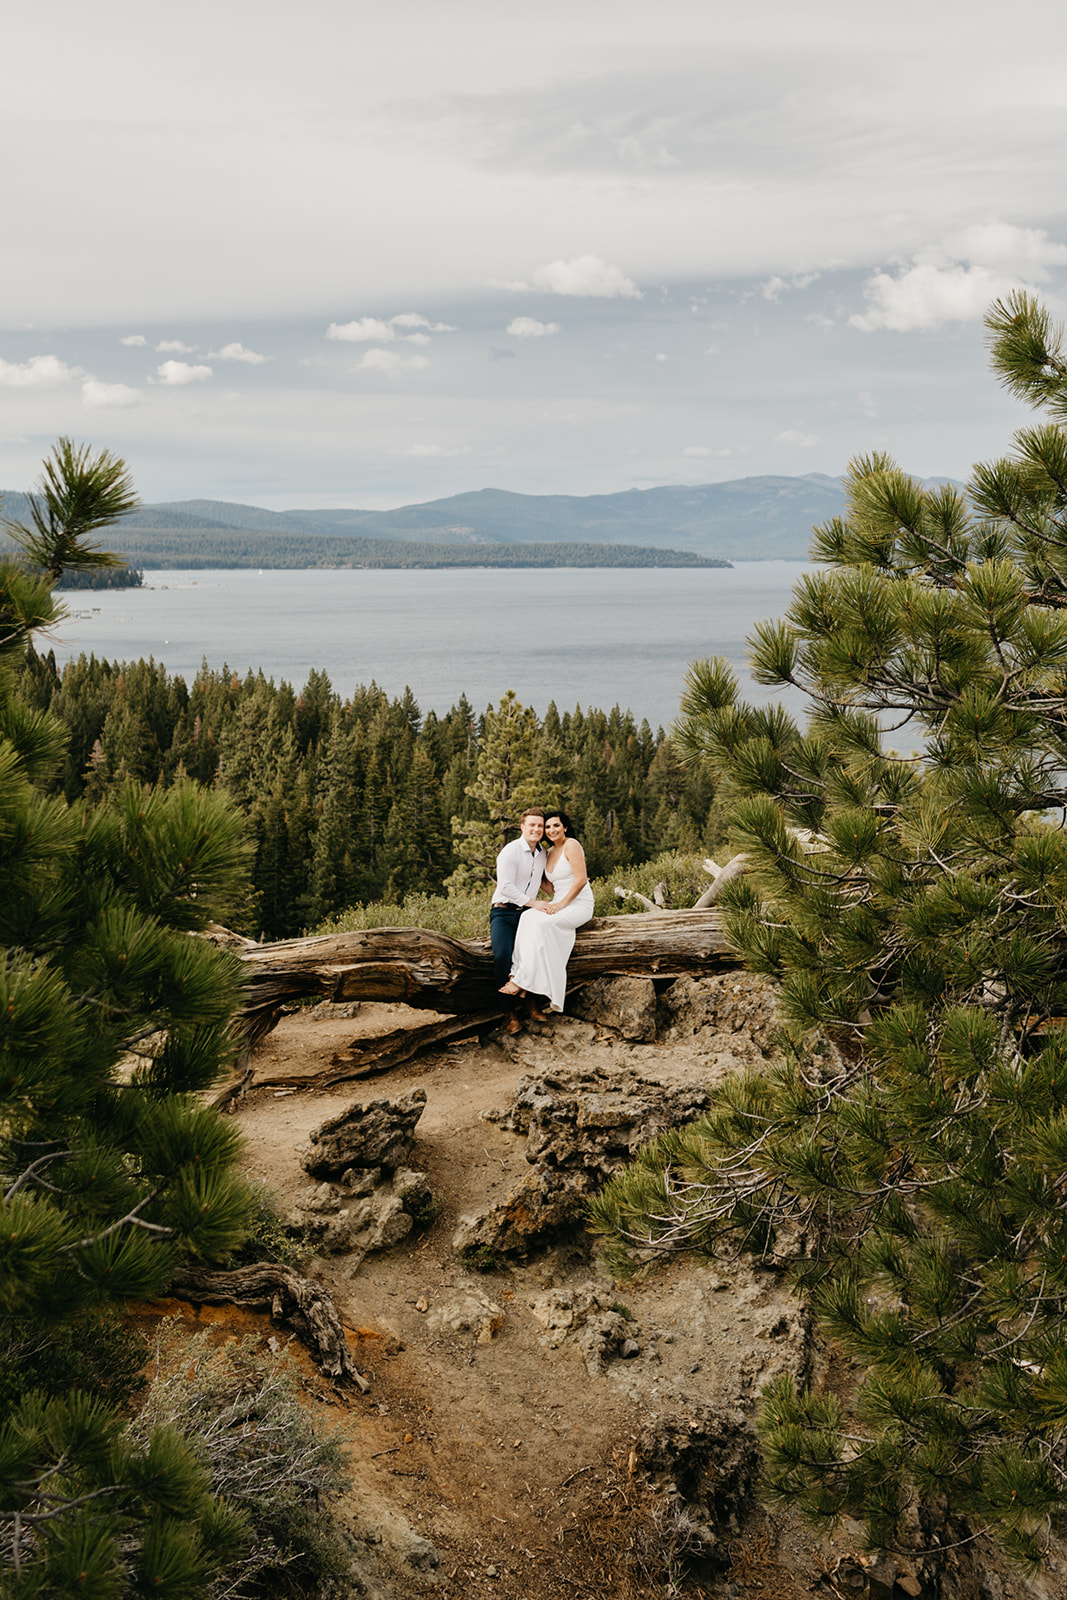 A couple sitting on a fallen tree in North Lake Tahoe